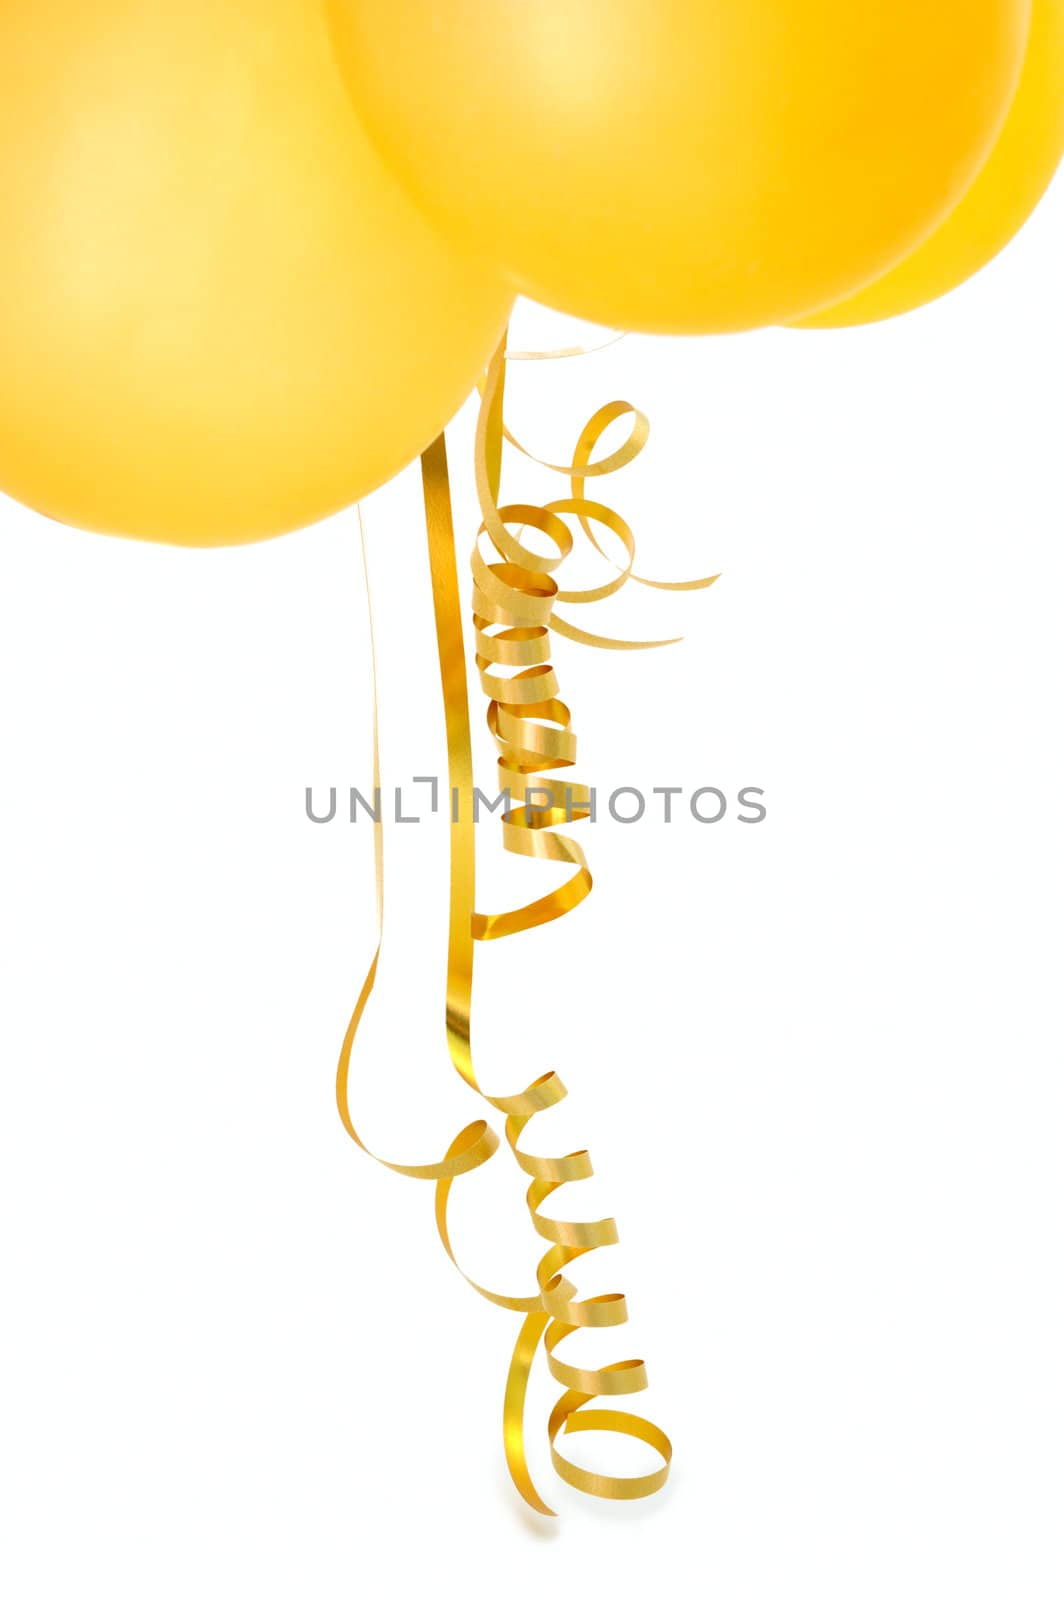 Orange balloons with gold twisted ribbons on overwhite background.